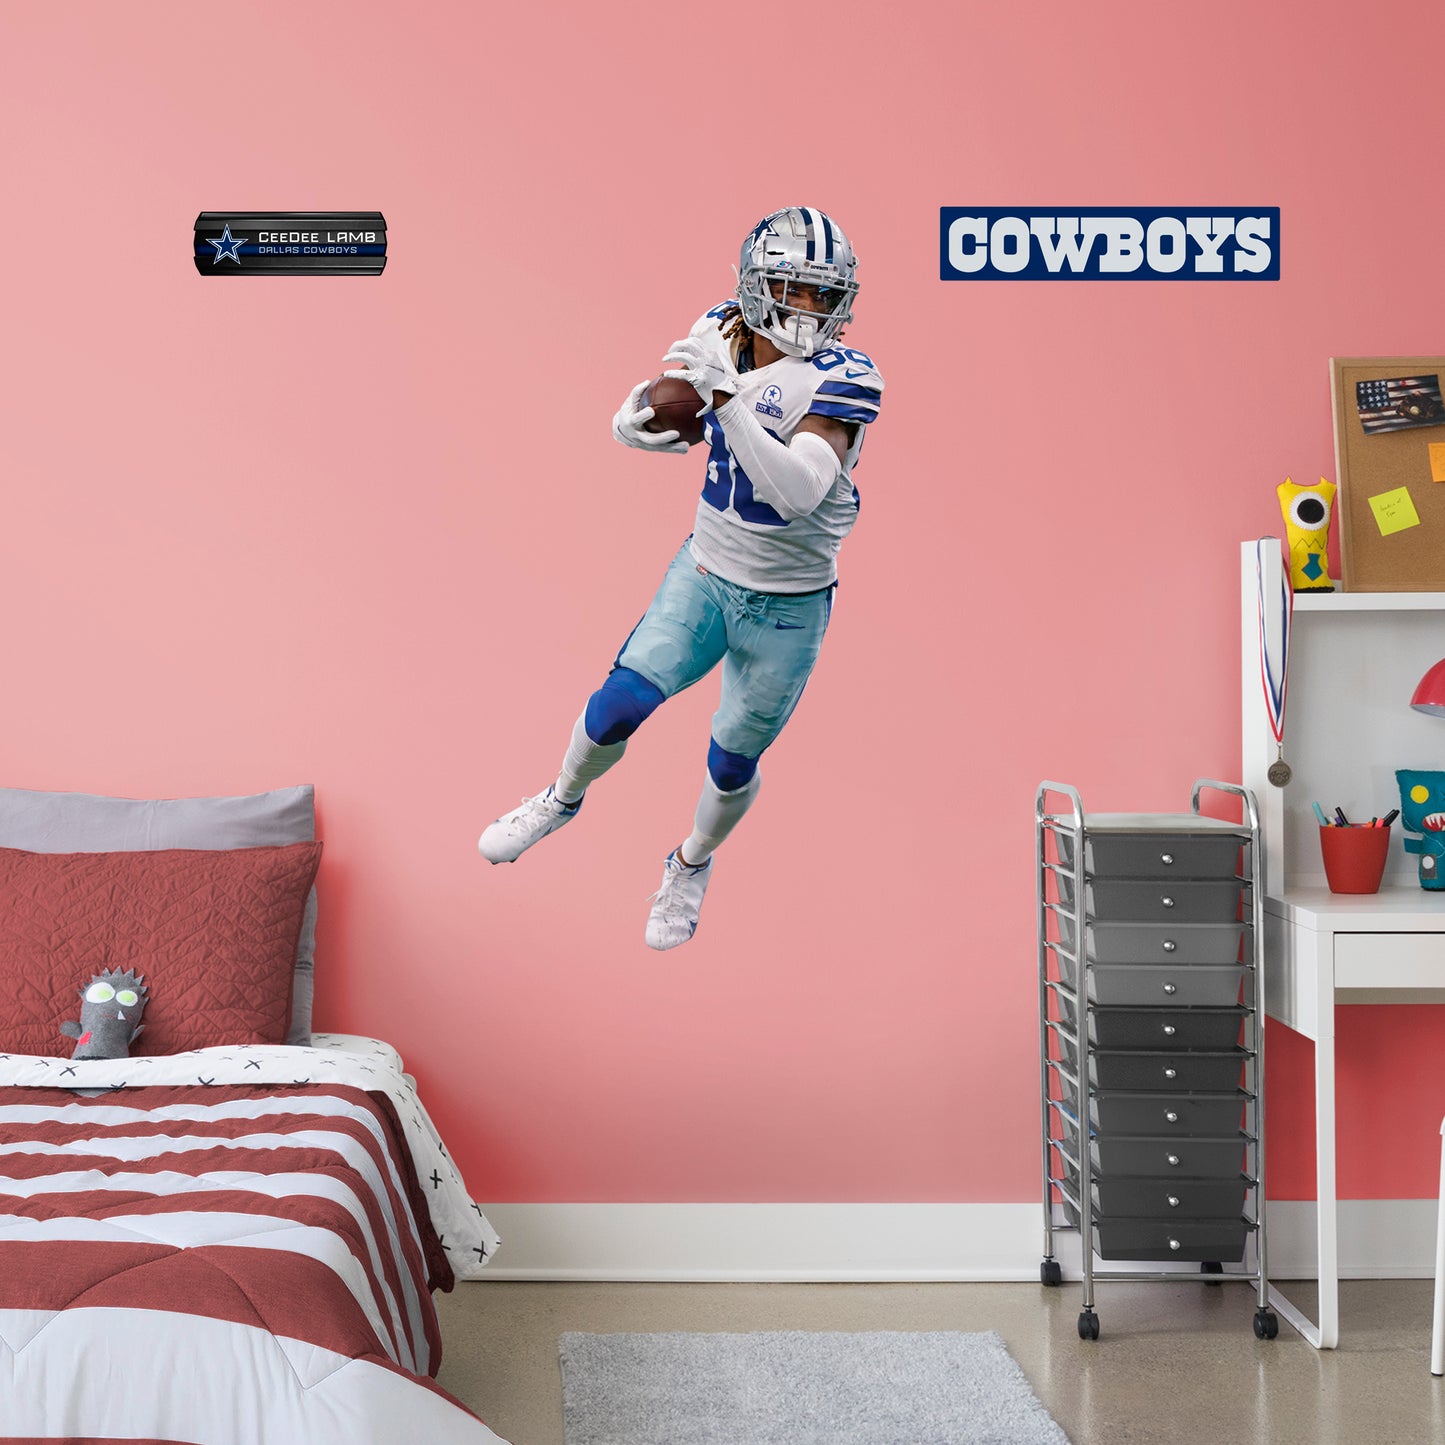 Dallas Cowboys: CeeDee Lamb   - Officially Licensed NFL Removable Wall Decal